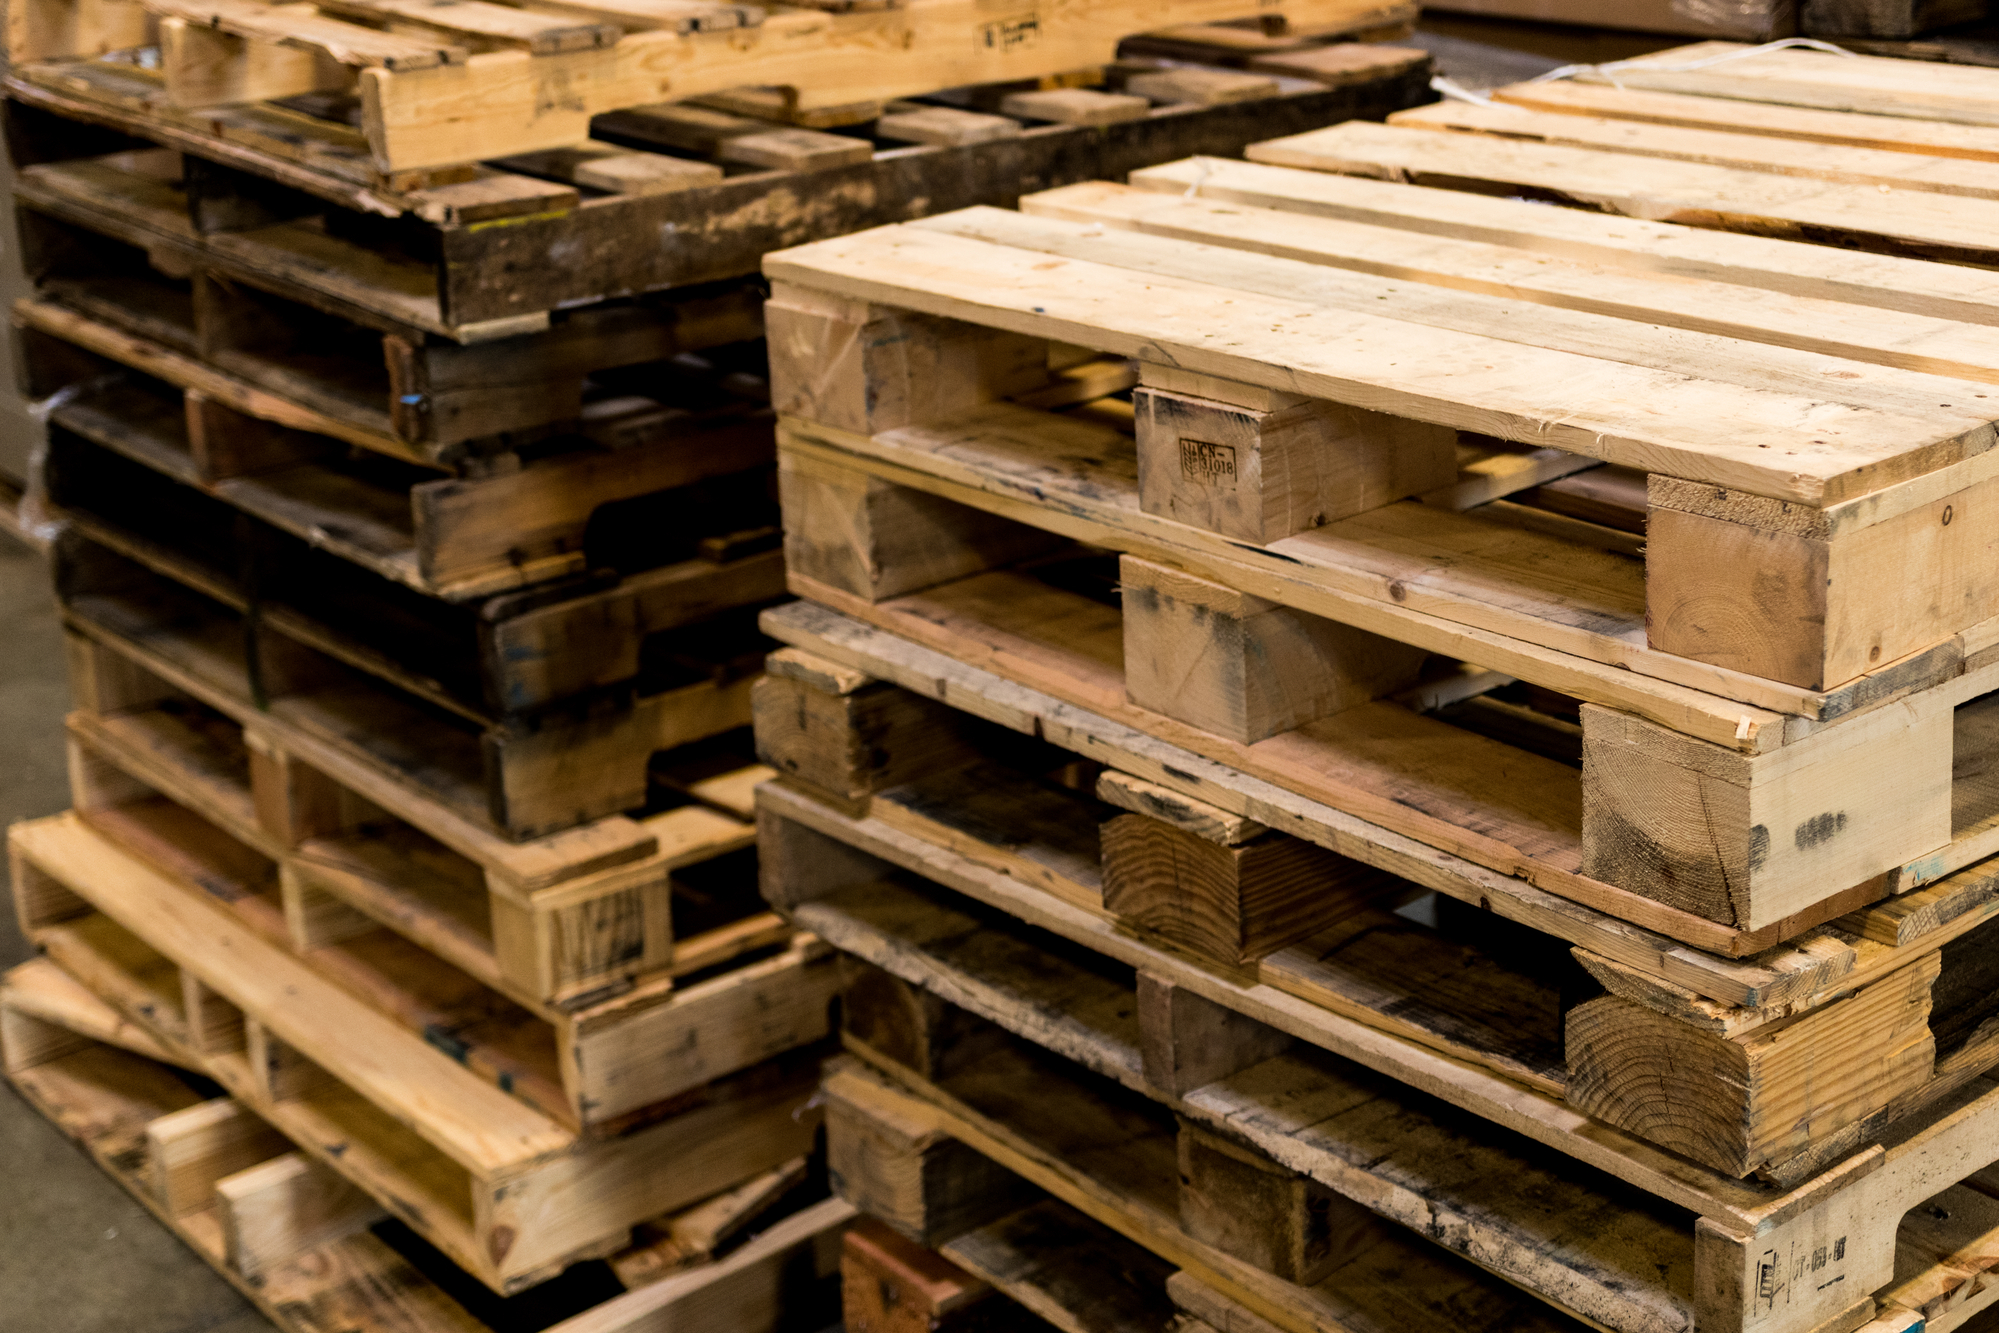 Used and new wood pallets stacked in rows cropped